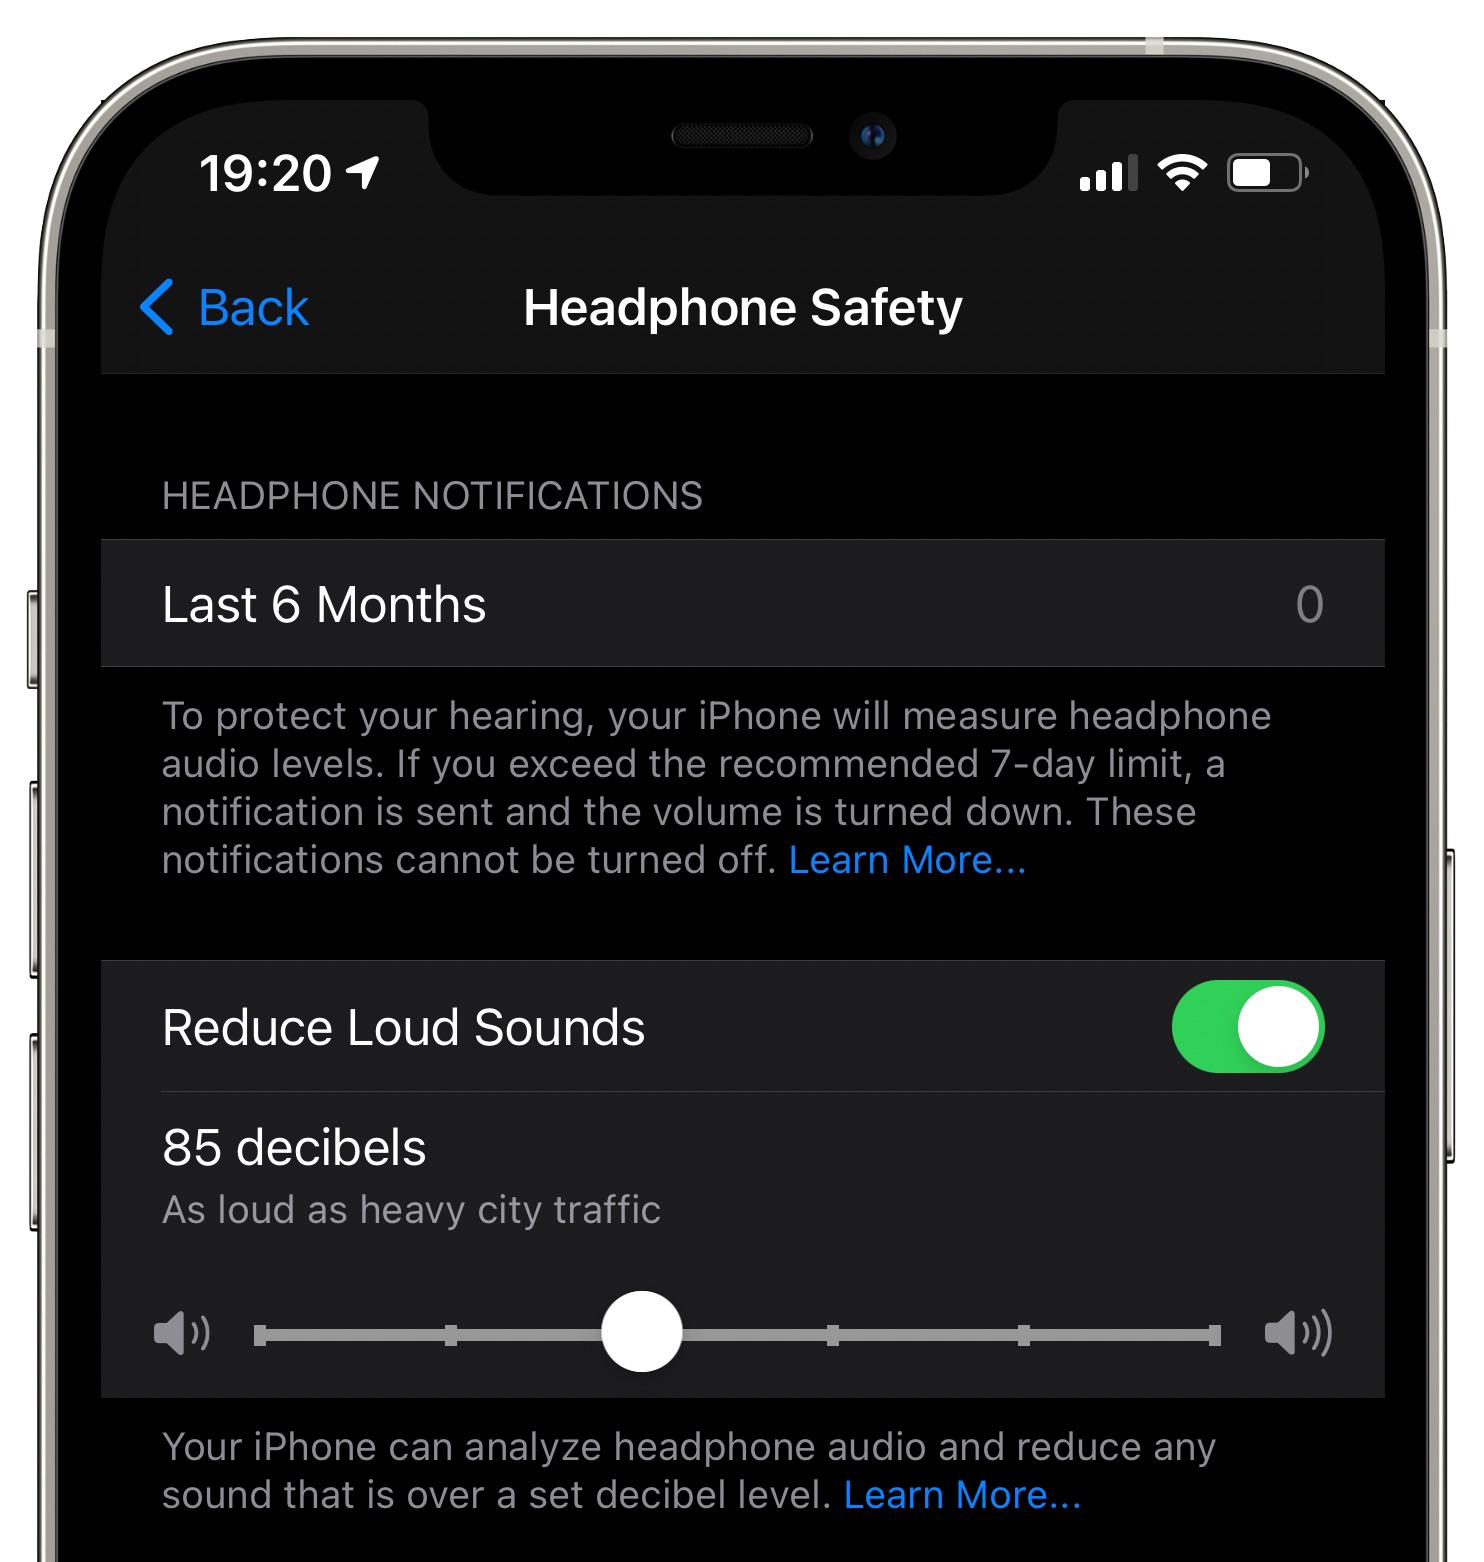 Headphone Safety settings on iPhone with the Reduce Loud Sounds option turned on